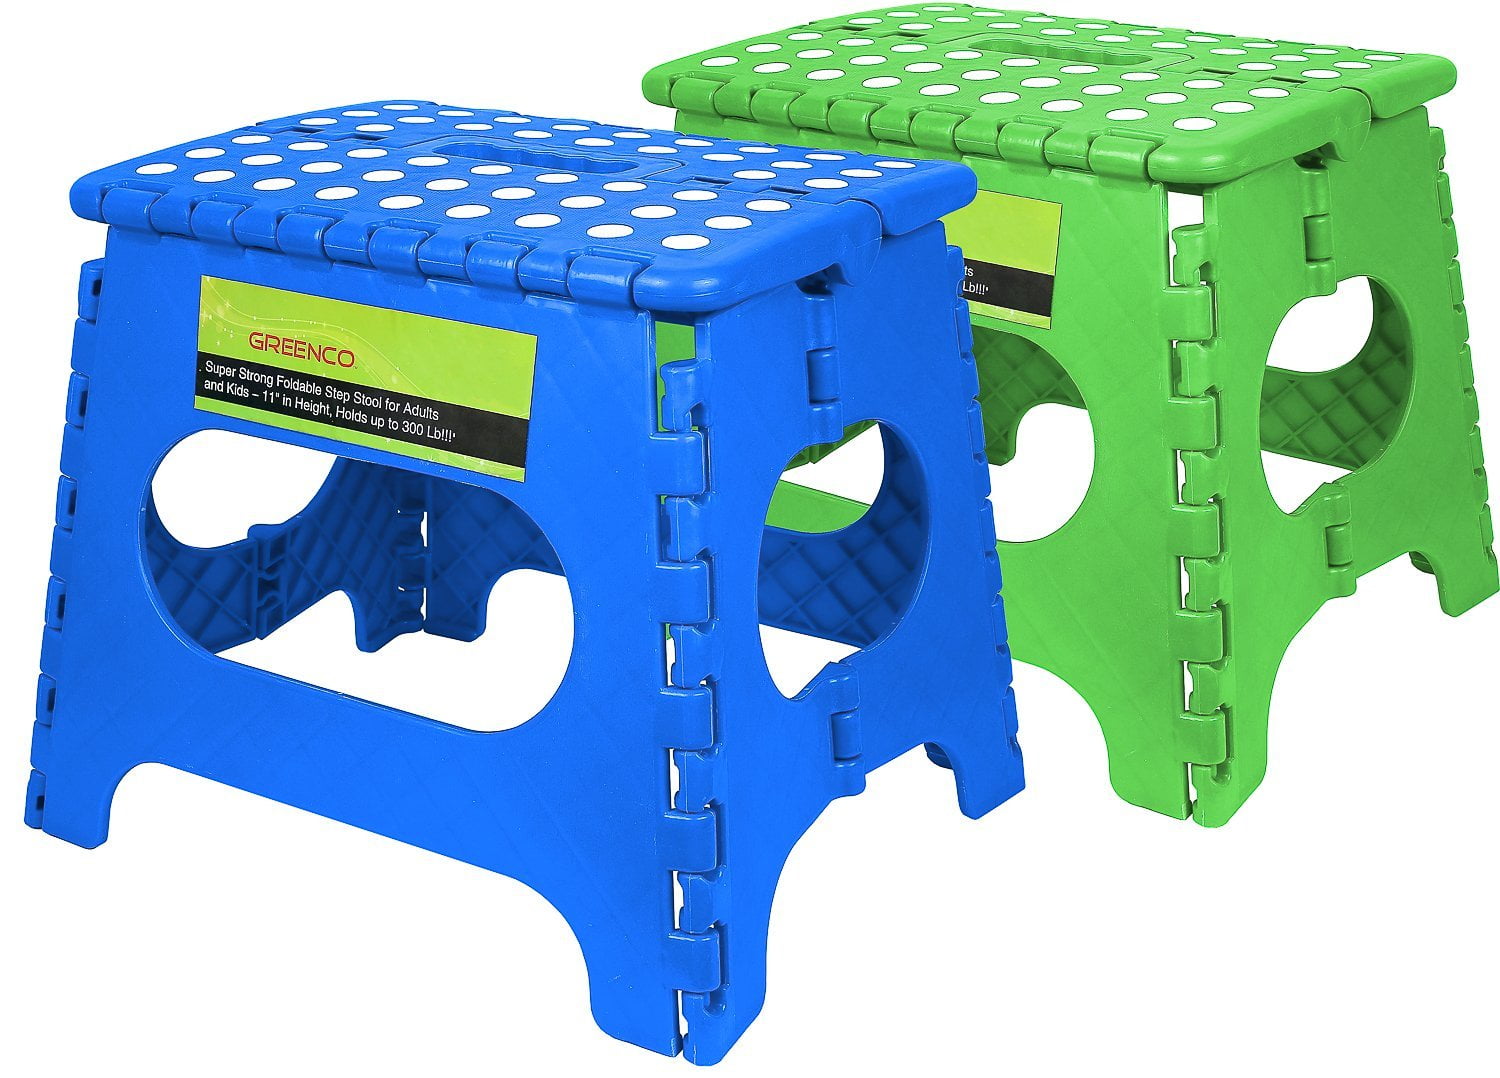 Green Greenco Super Strong Foldable Step Stool for Adults and Kids-11 in Height Holds up to 300 Lb